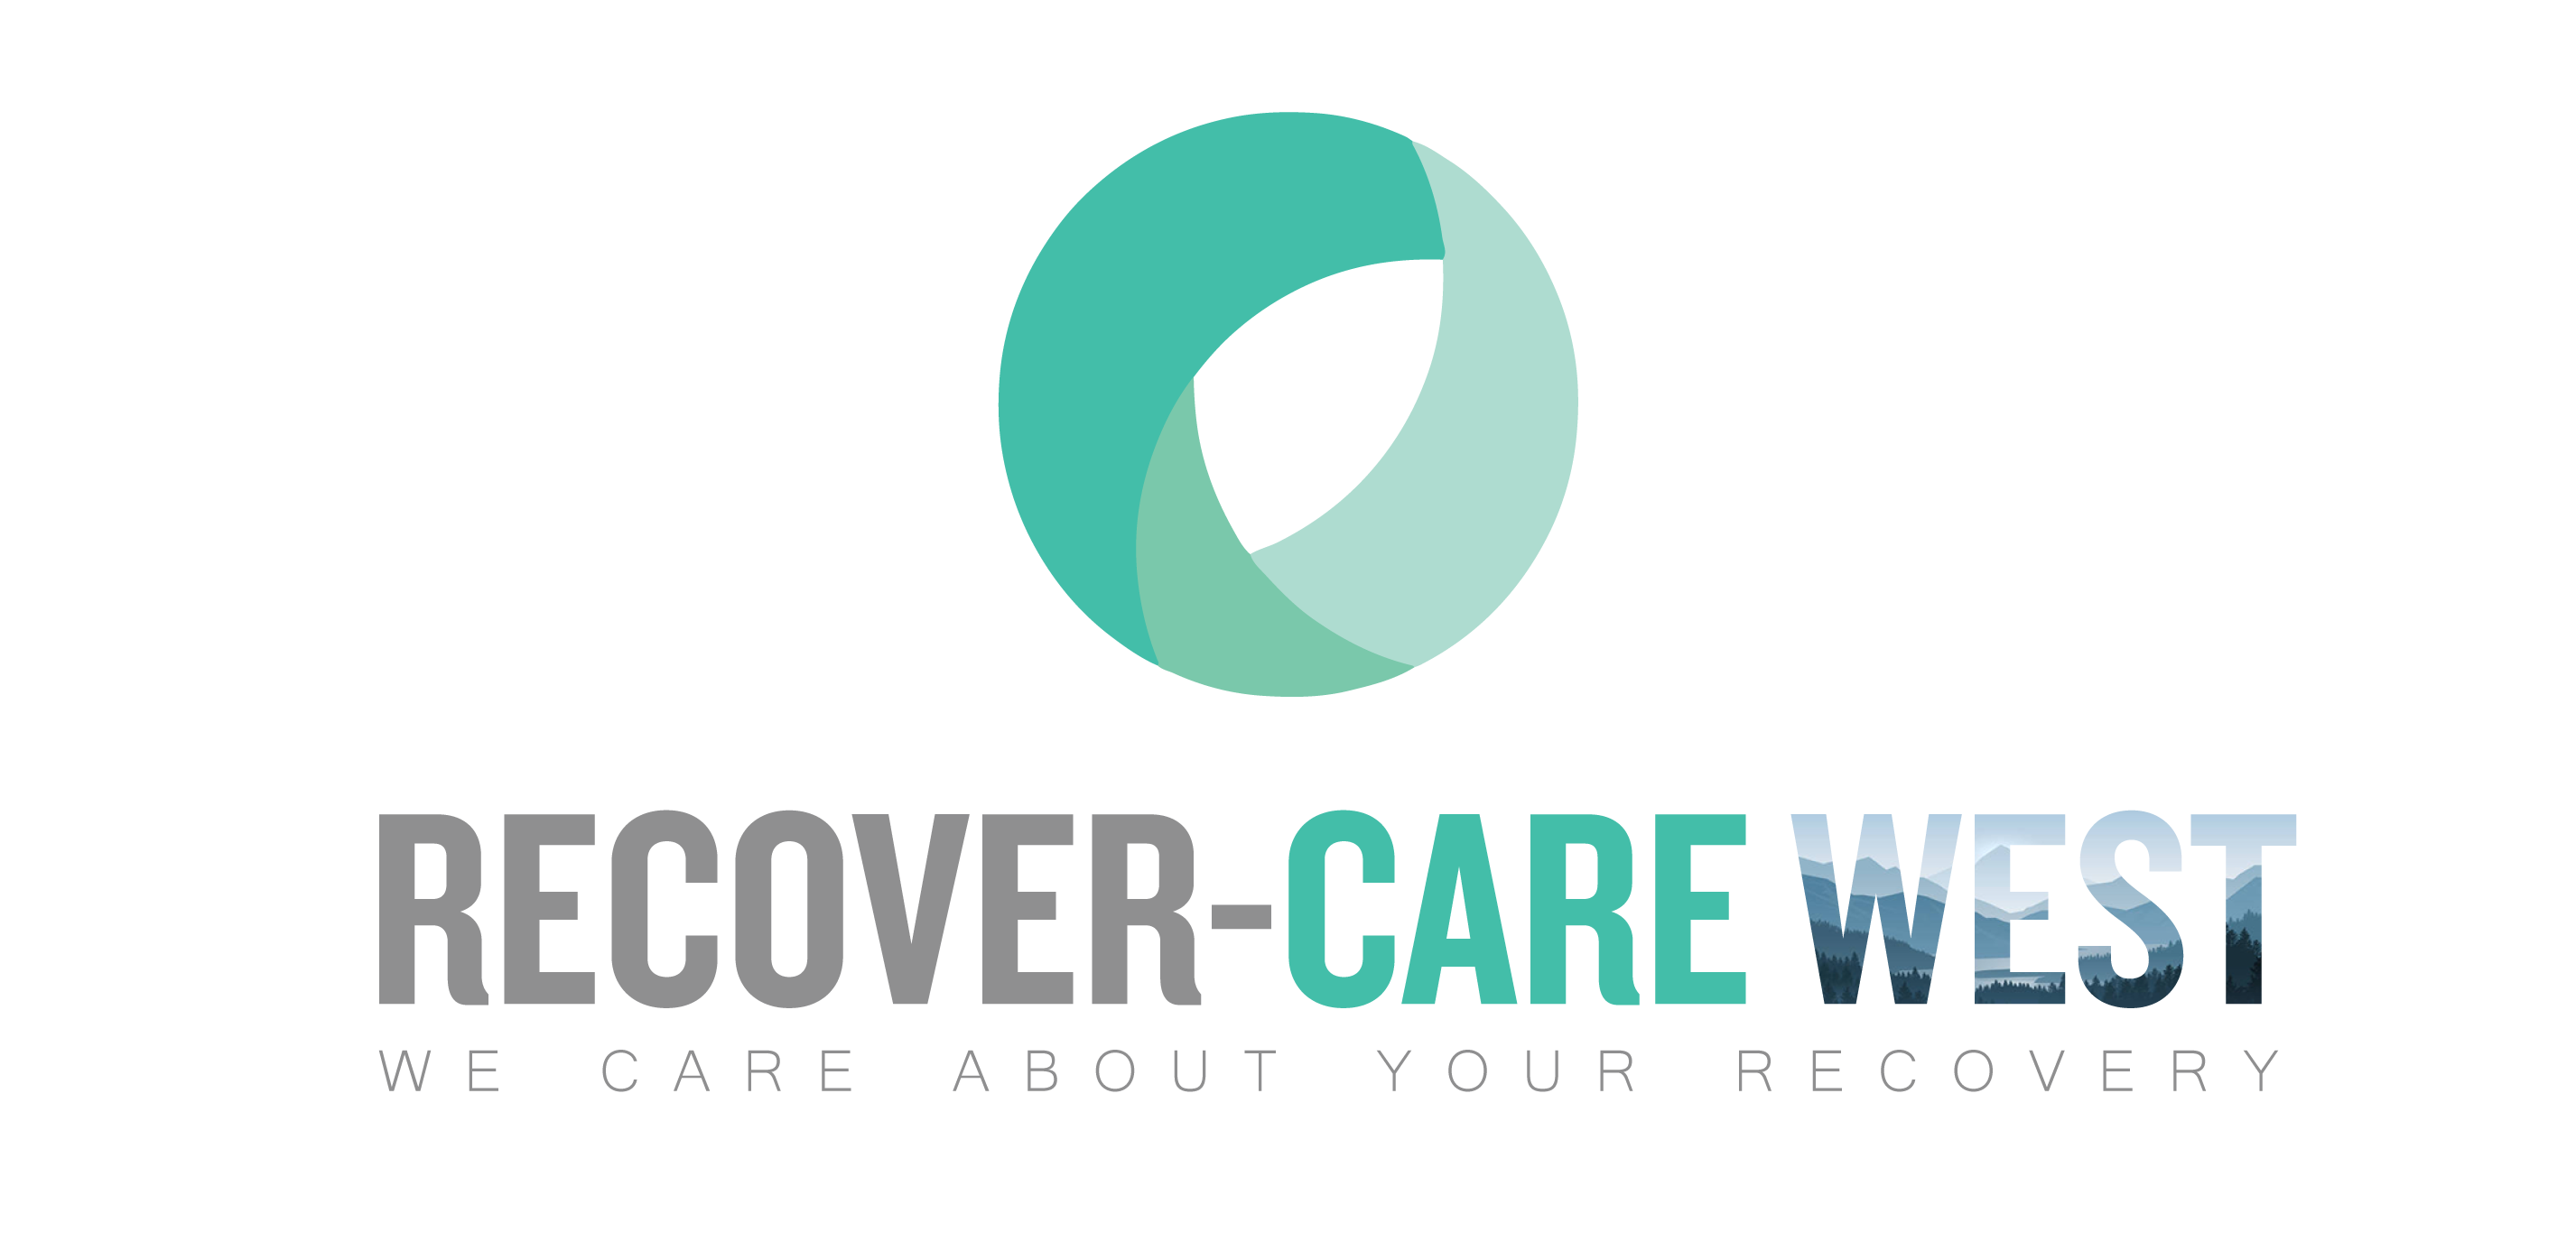 Recover-Care West